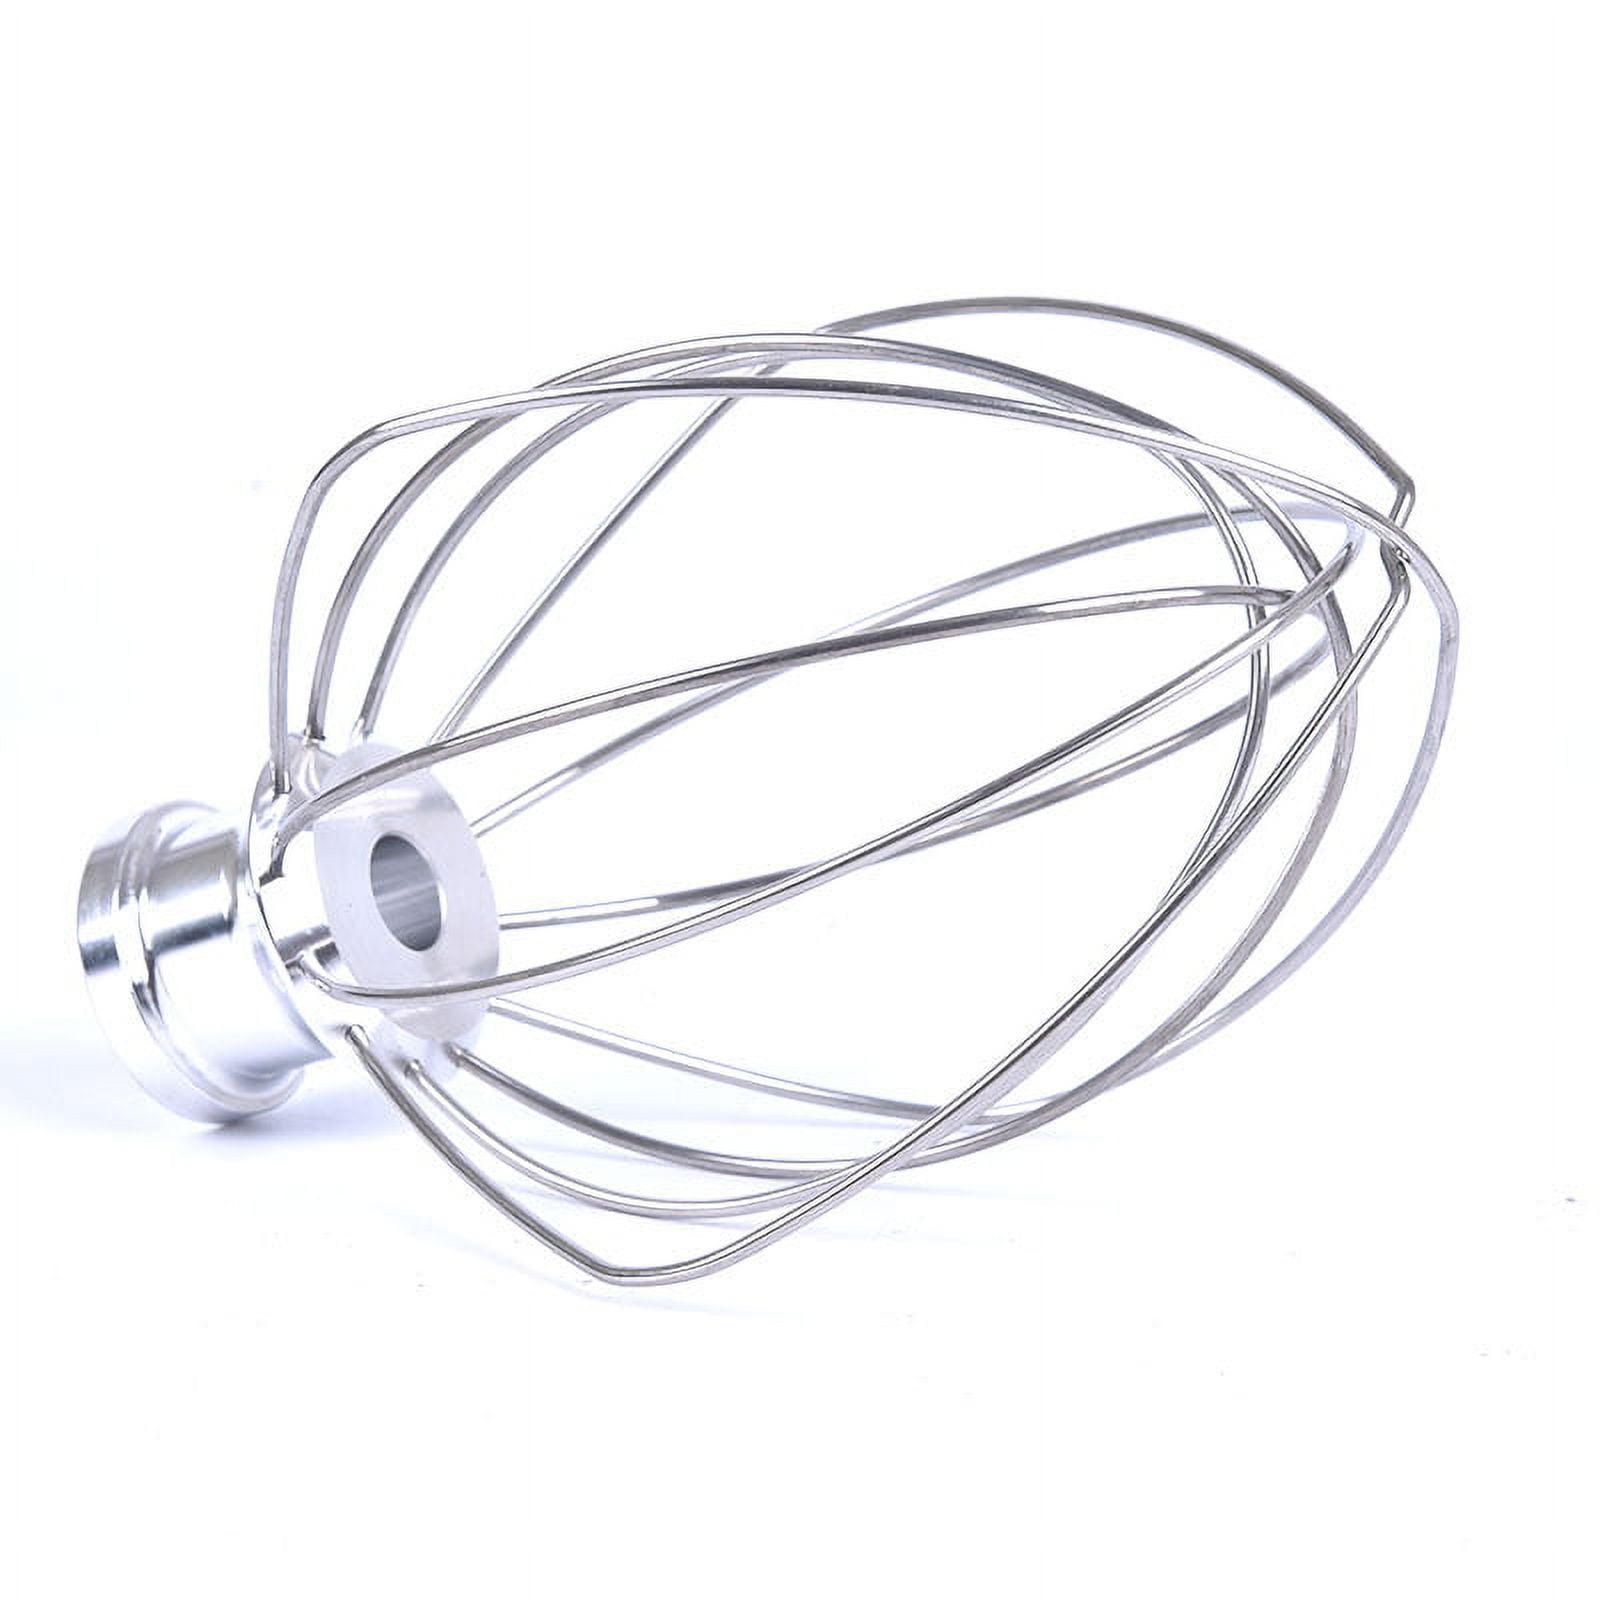 Letaosk 304 Stainless Steel 6 Wire Whip Stand Mixer Attachment Fit For  Kitchenaid K45ww Wp9704329 Ksm150 Ksm160 K45 Ksm90 Ksm100 - Tool Parts -  AliExpress